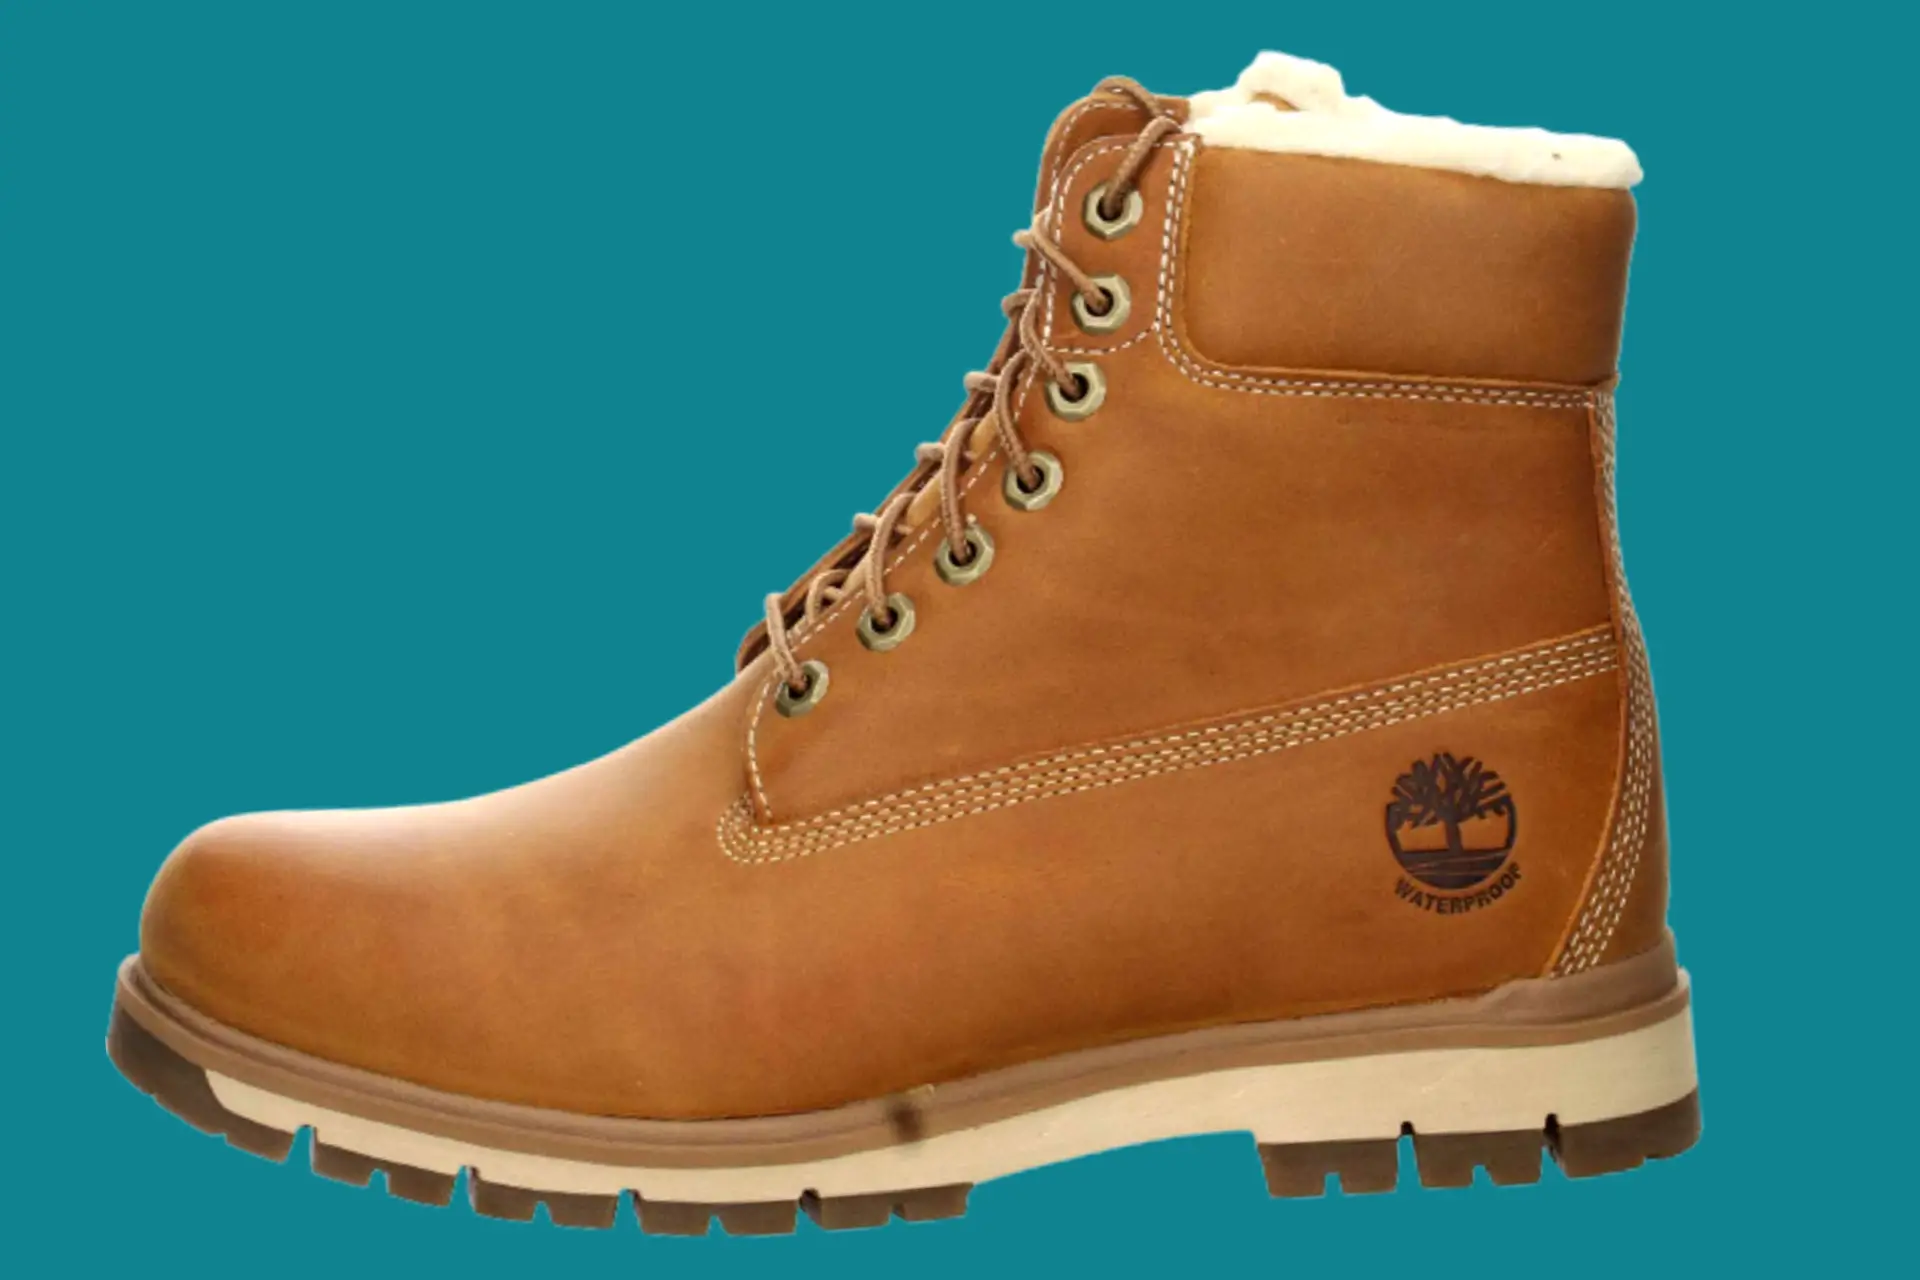 Outdoor Timberland boots for hiking